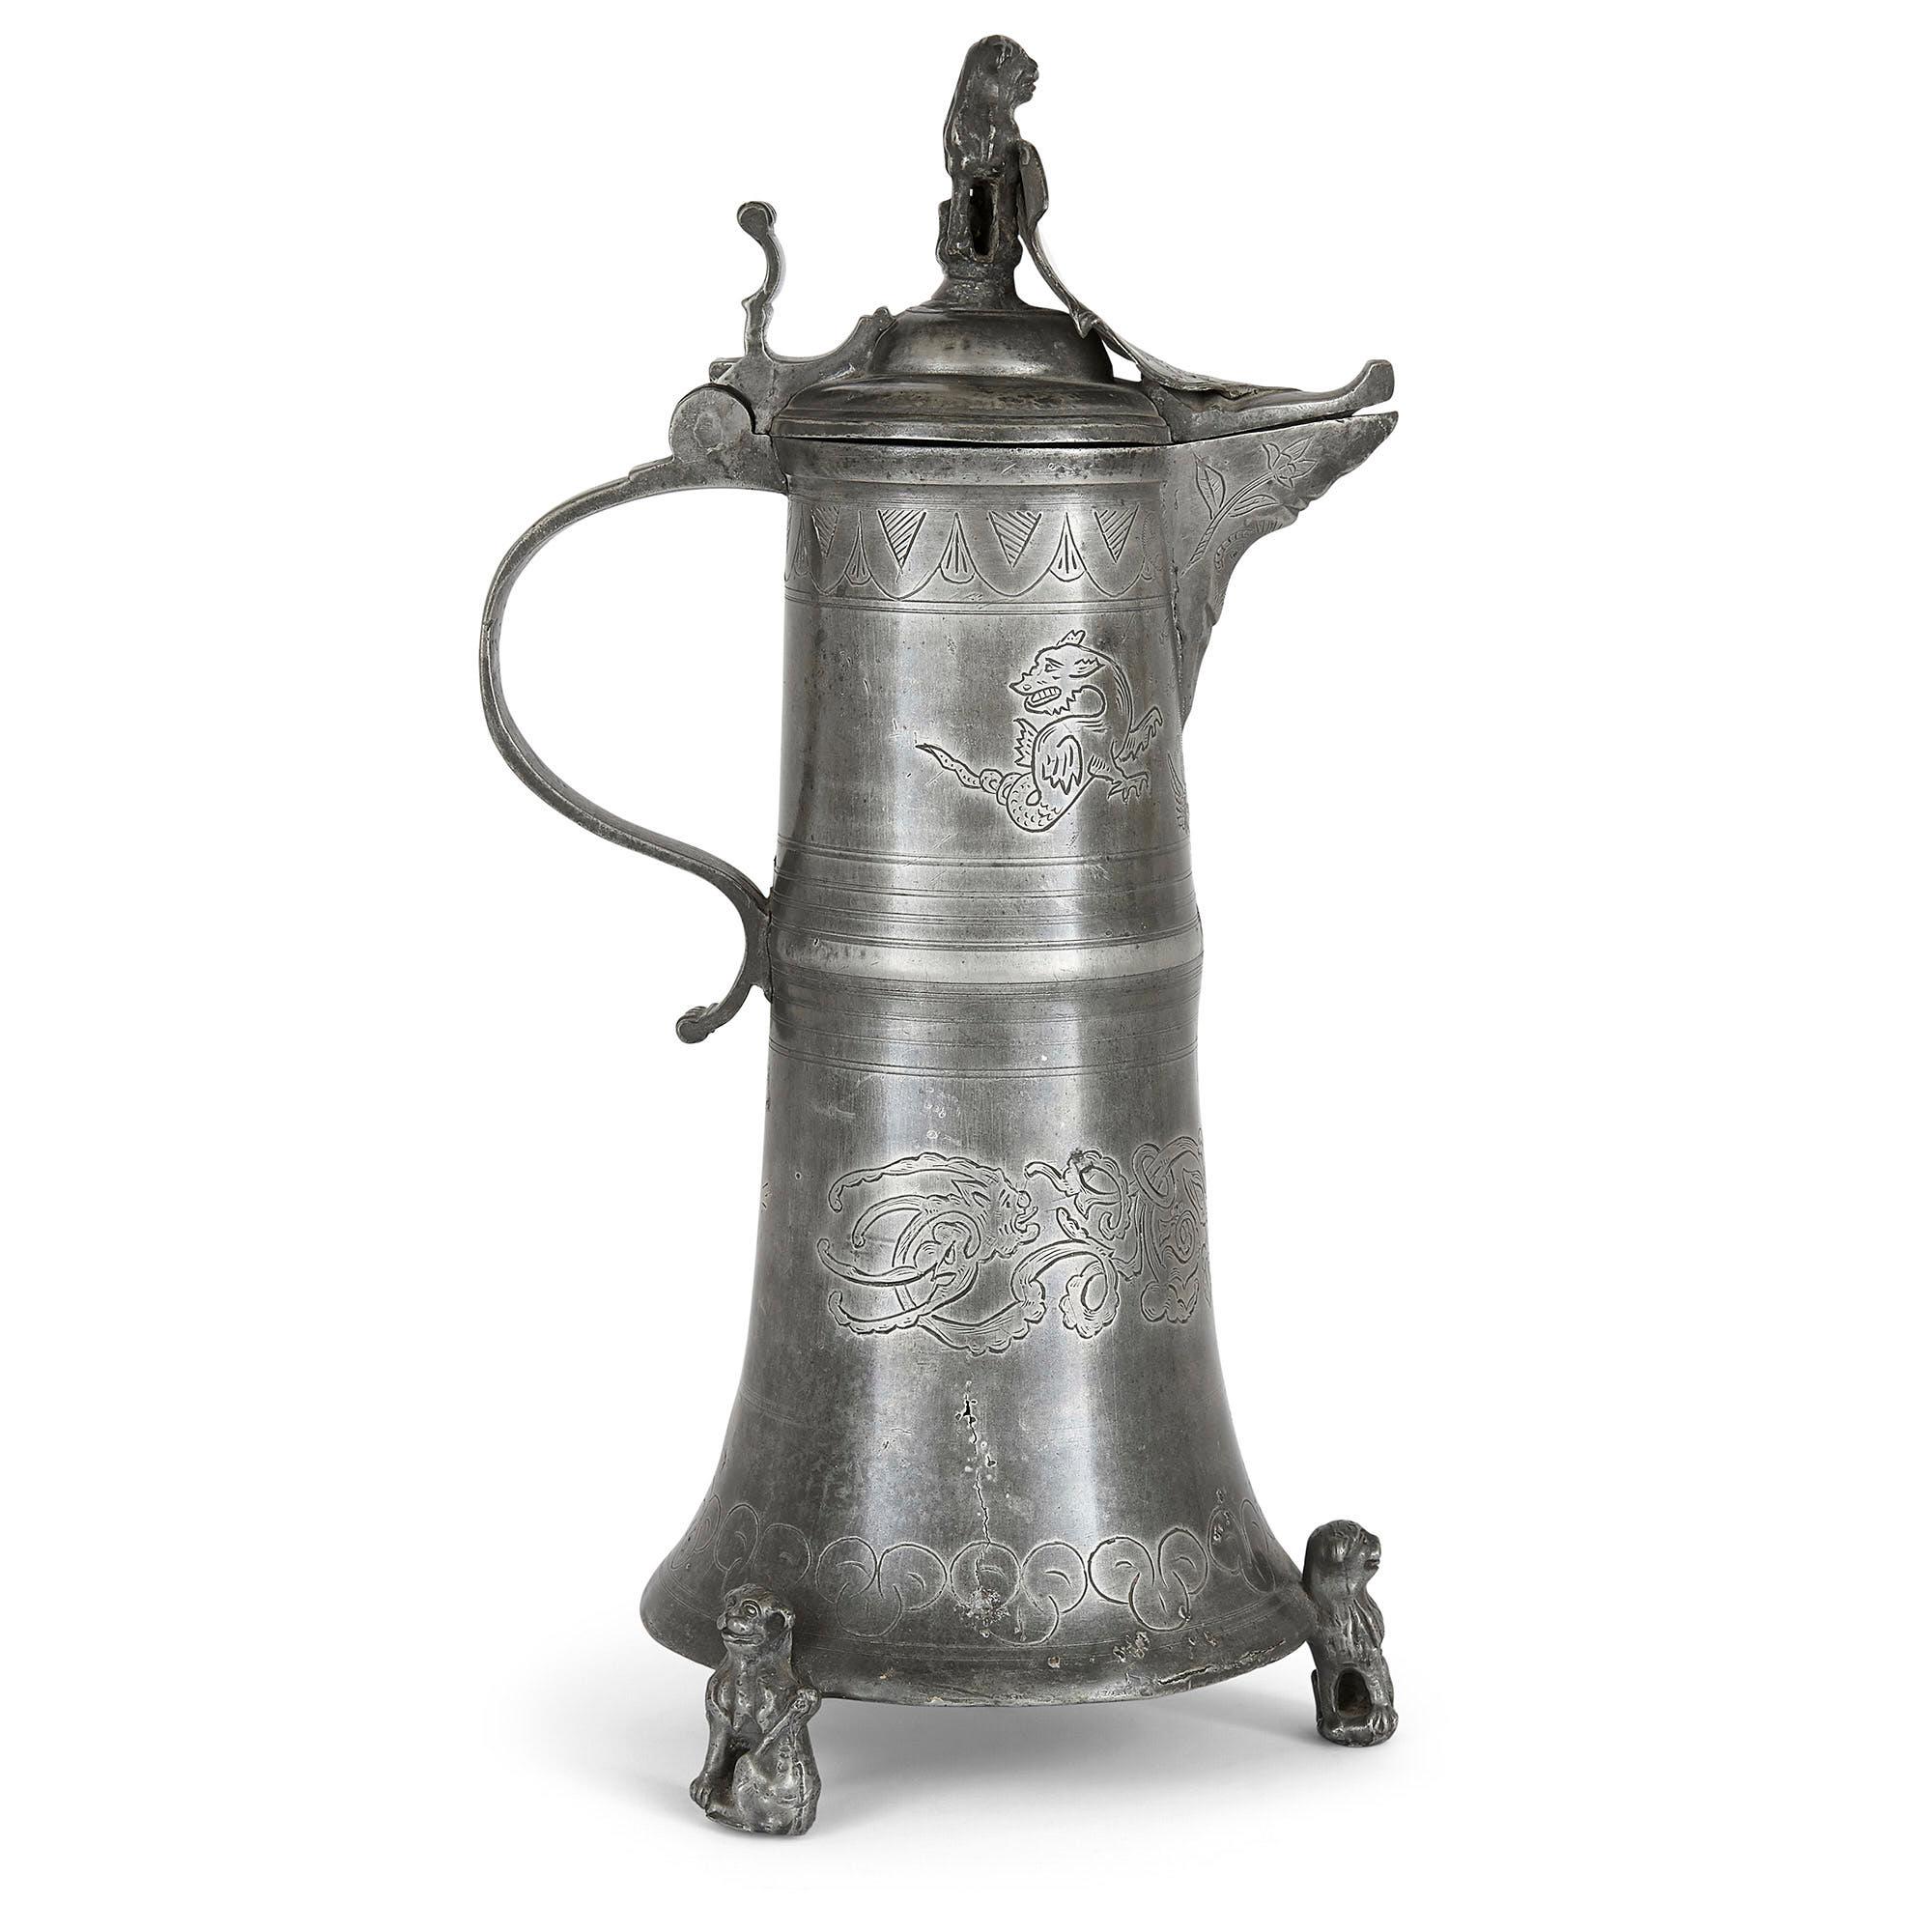 Antique German pewter jug
German, early 19th Century
Height 40cm, width 17cm, depth 20cm

This German pewter ewer is of traditional form, featuring a long body that is broader at the base than top, three lion feet, a loop handle, and a hinged